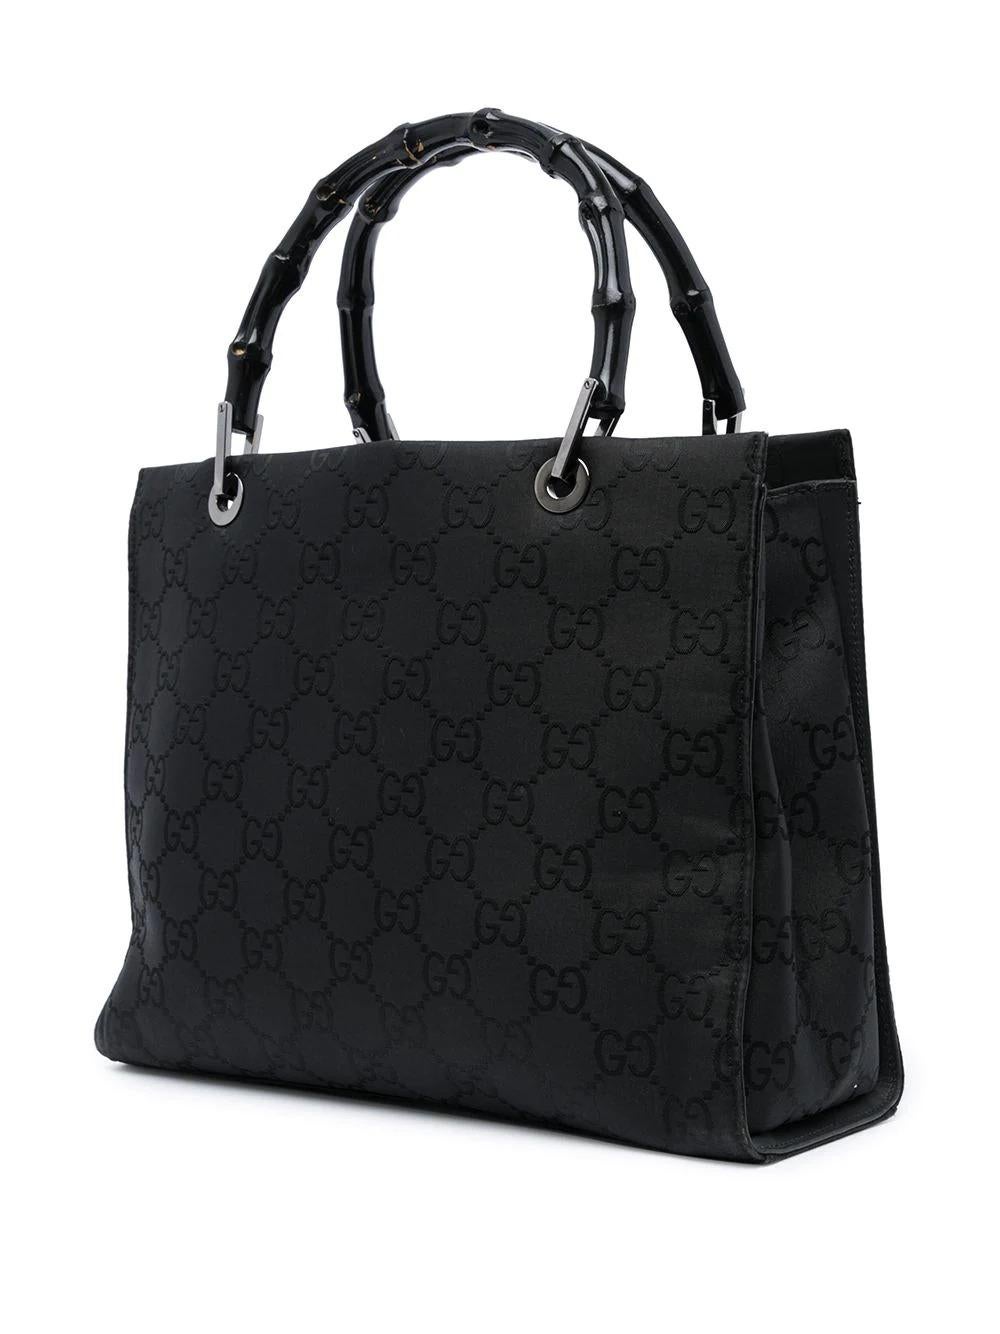 This vintage Gucci Black Canvas Bag features the signature GG logo print, bamboo handles, an open top and interior zip compartments, adding style and chic to any outfit.

Colour: Black

Composition: Body: Fabric 100%, Top: Bamboo 100%, Trims: